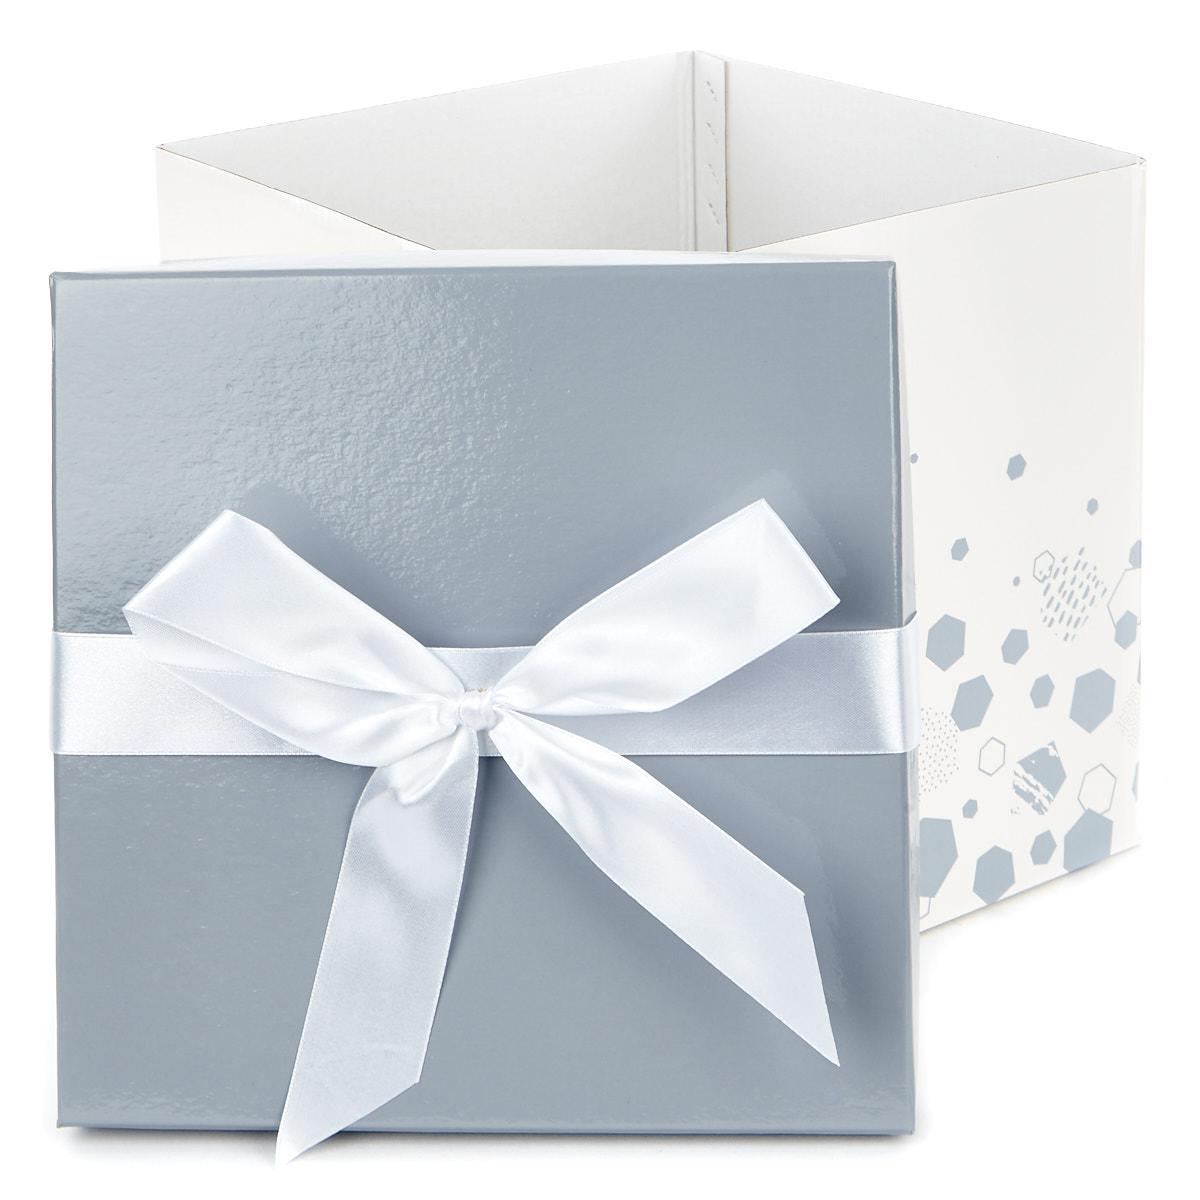 Large Flat-Pack Gift Box - Silver Hexagons